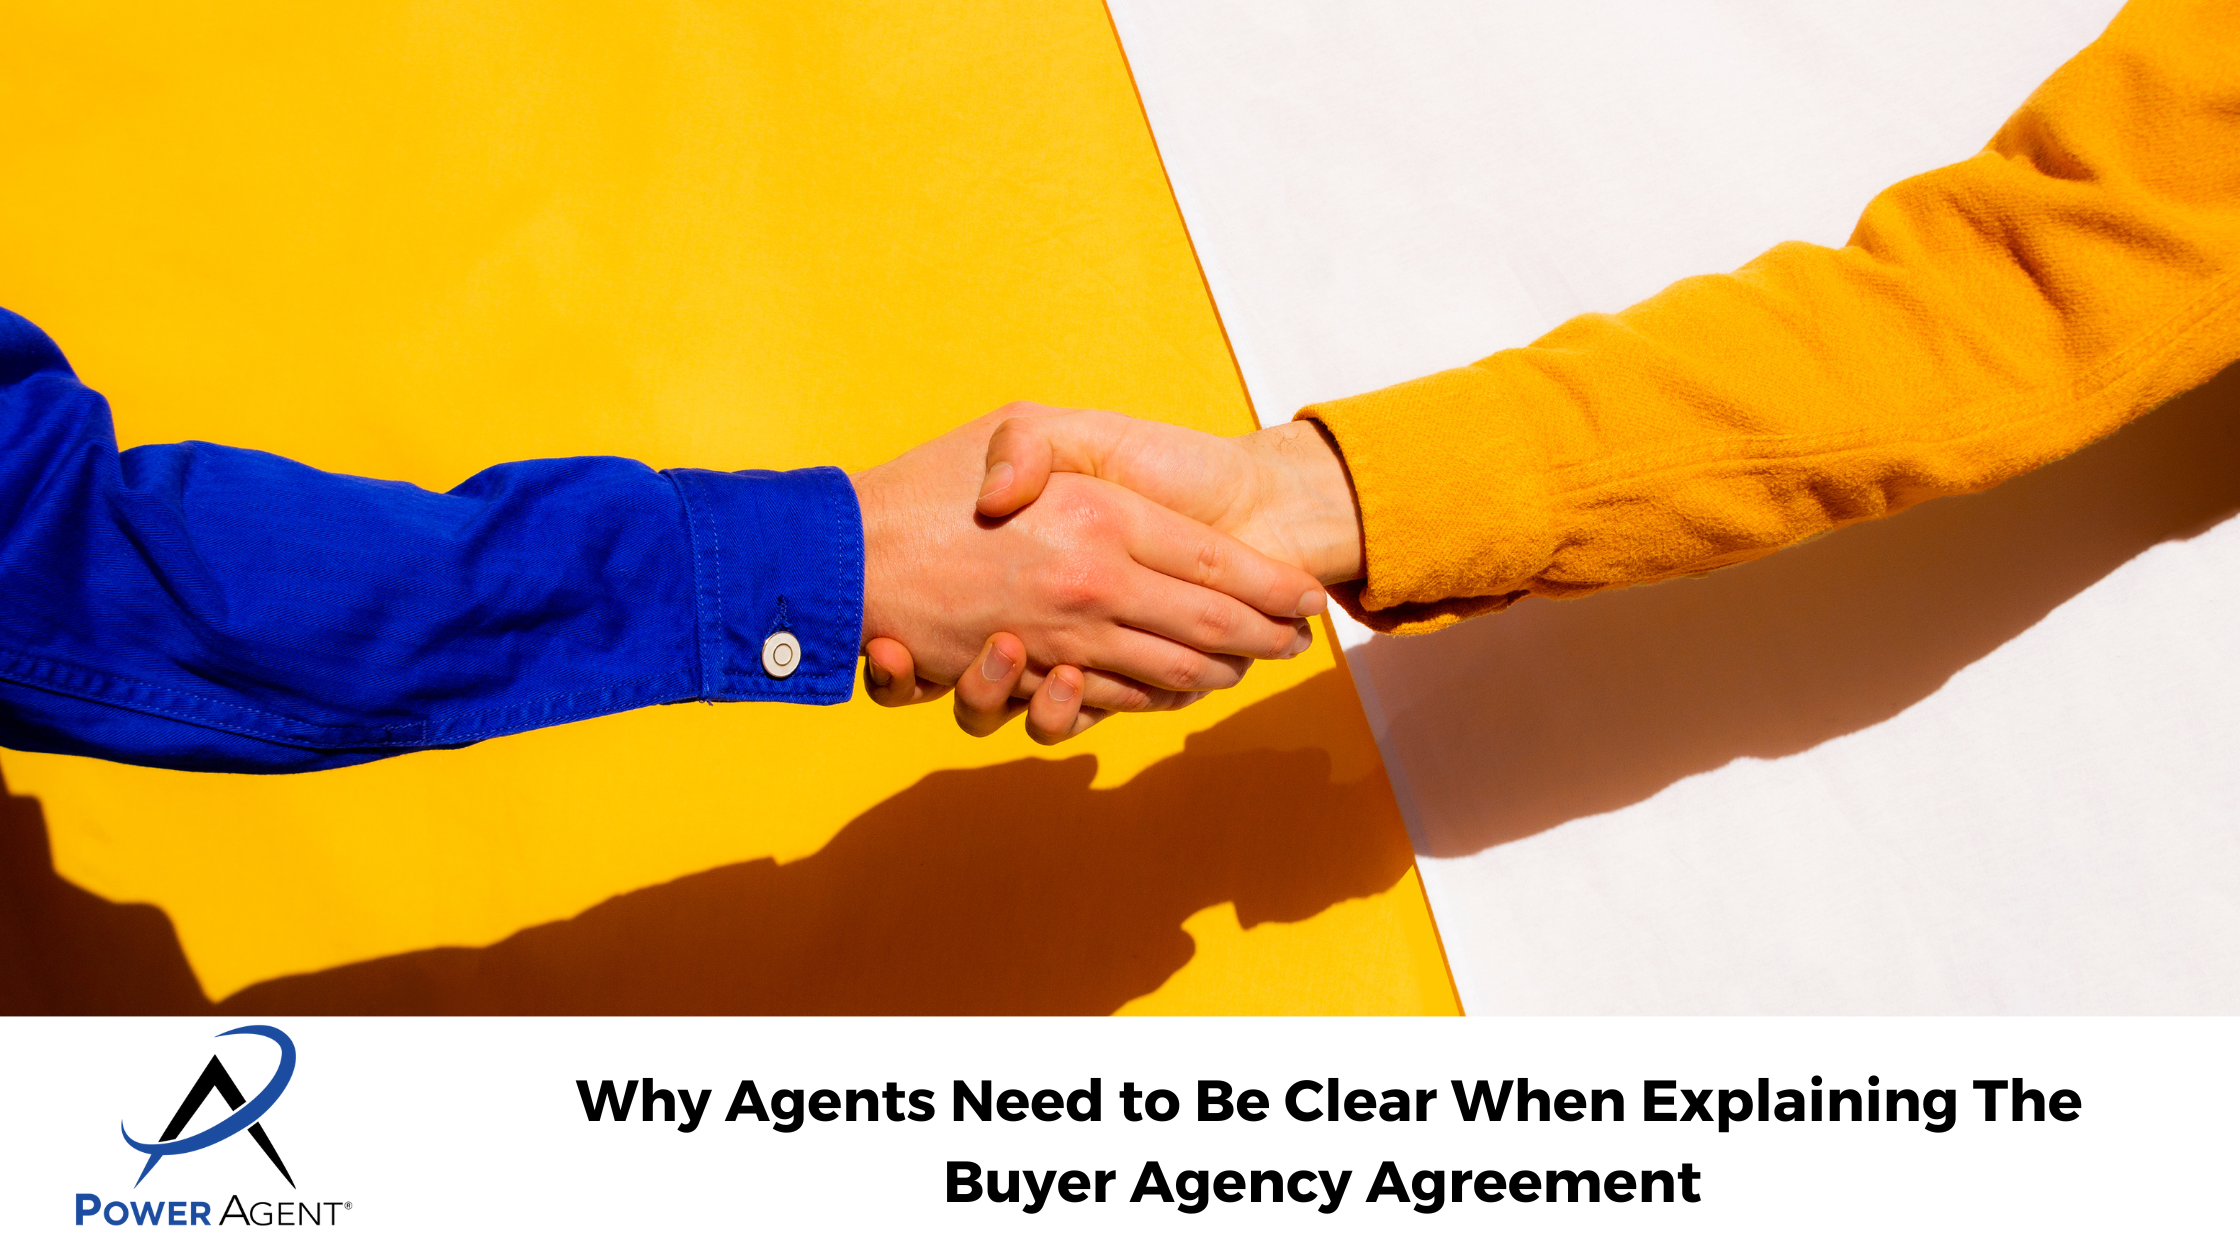 Why Agents Need to Be Clear When Explaining The Buyer Agency Agreement